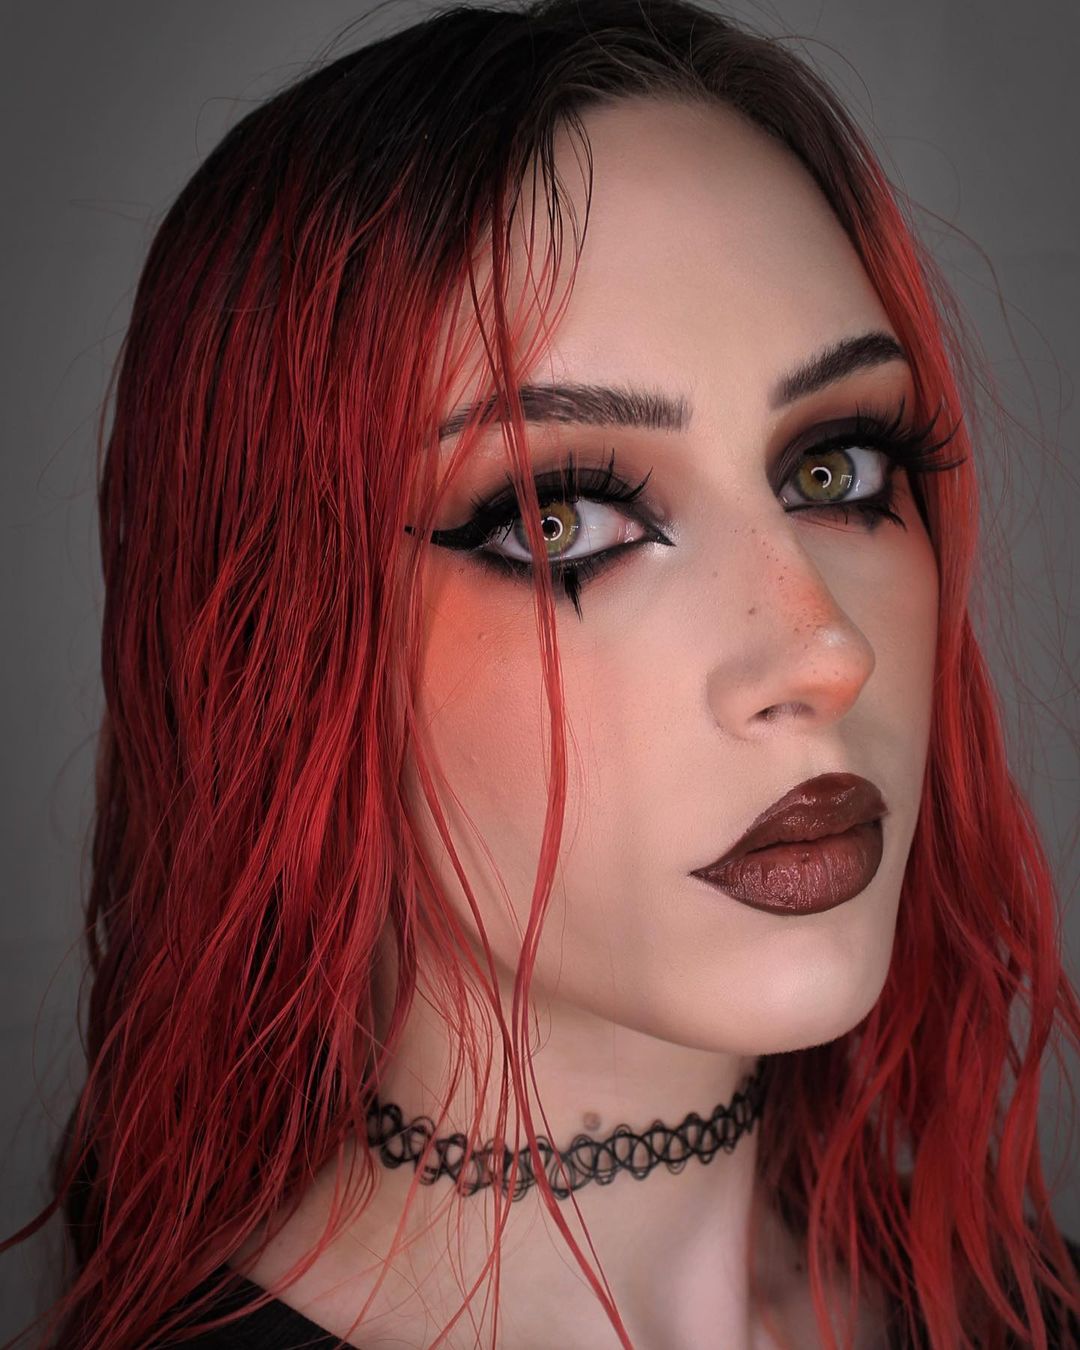 Top 9 Emo Makeup Ideas for When You Want To Experiment